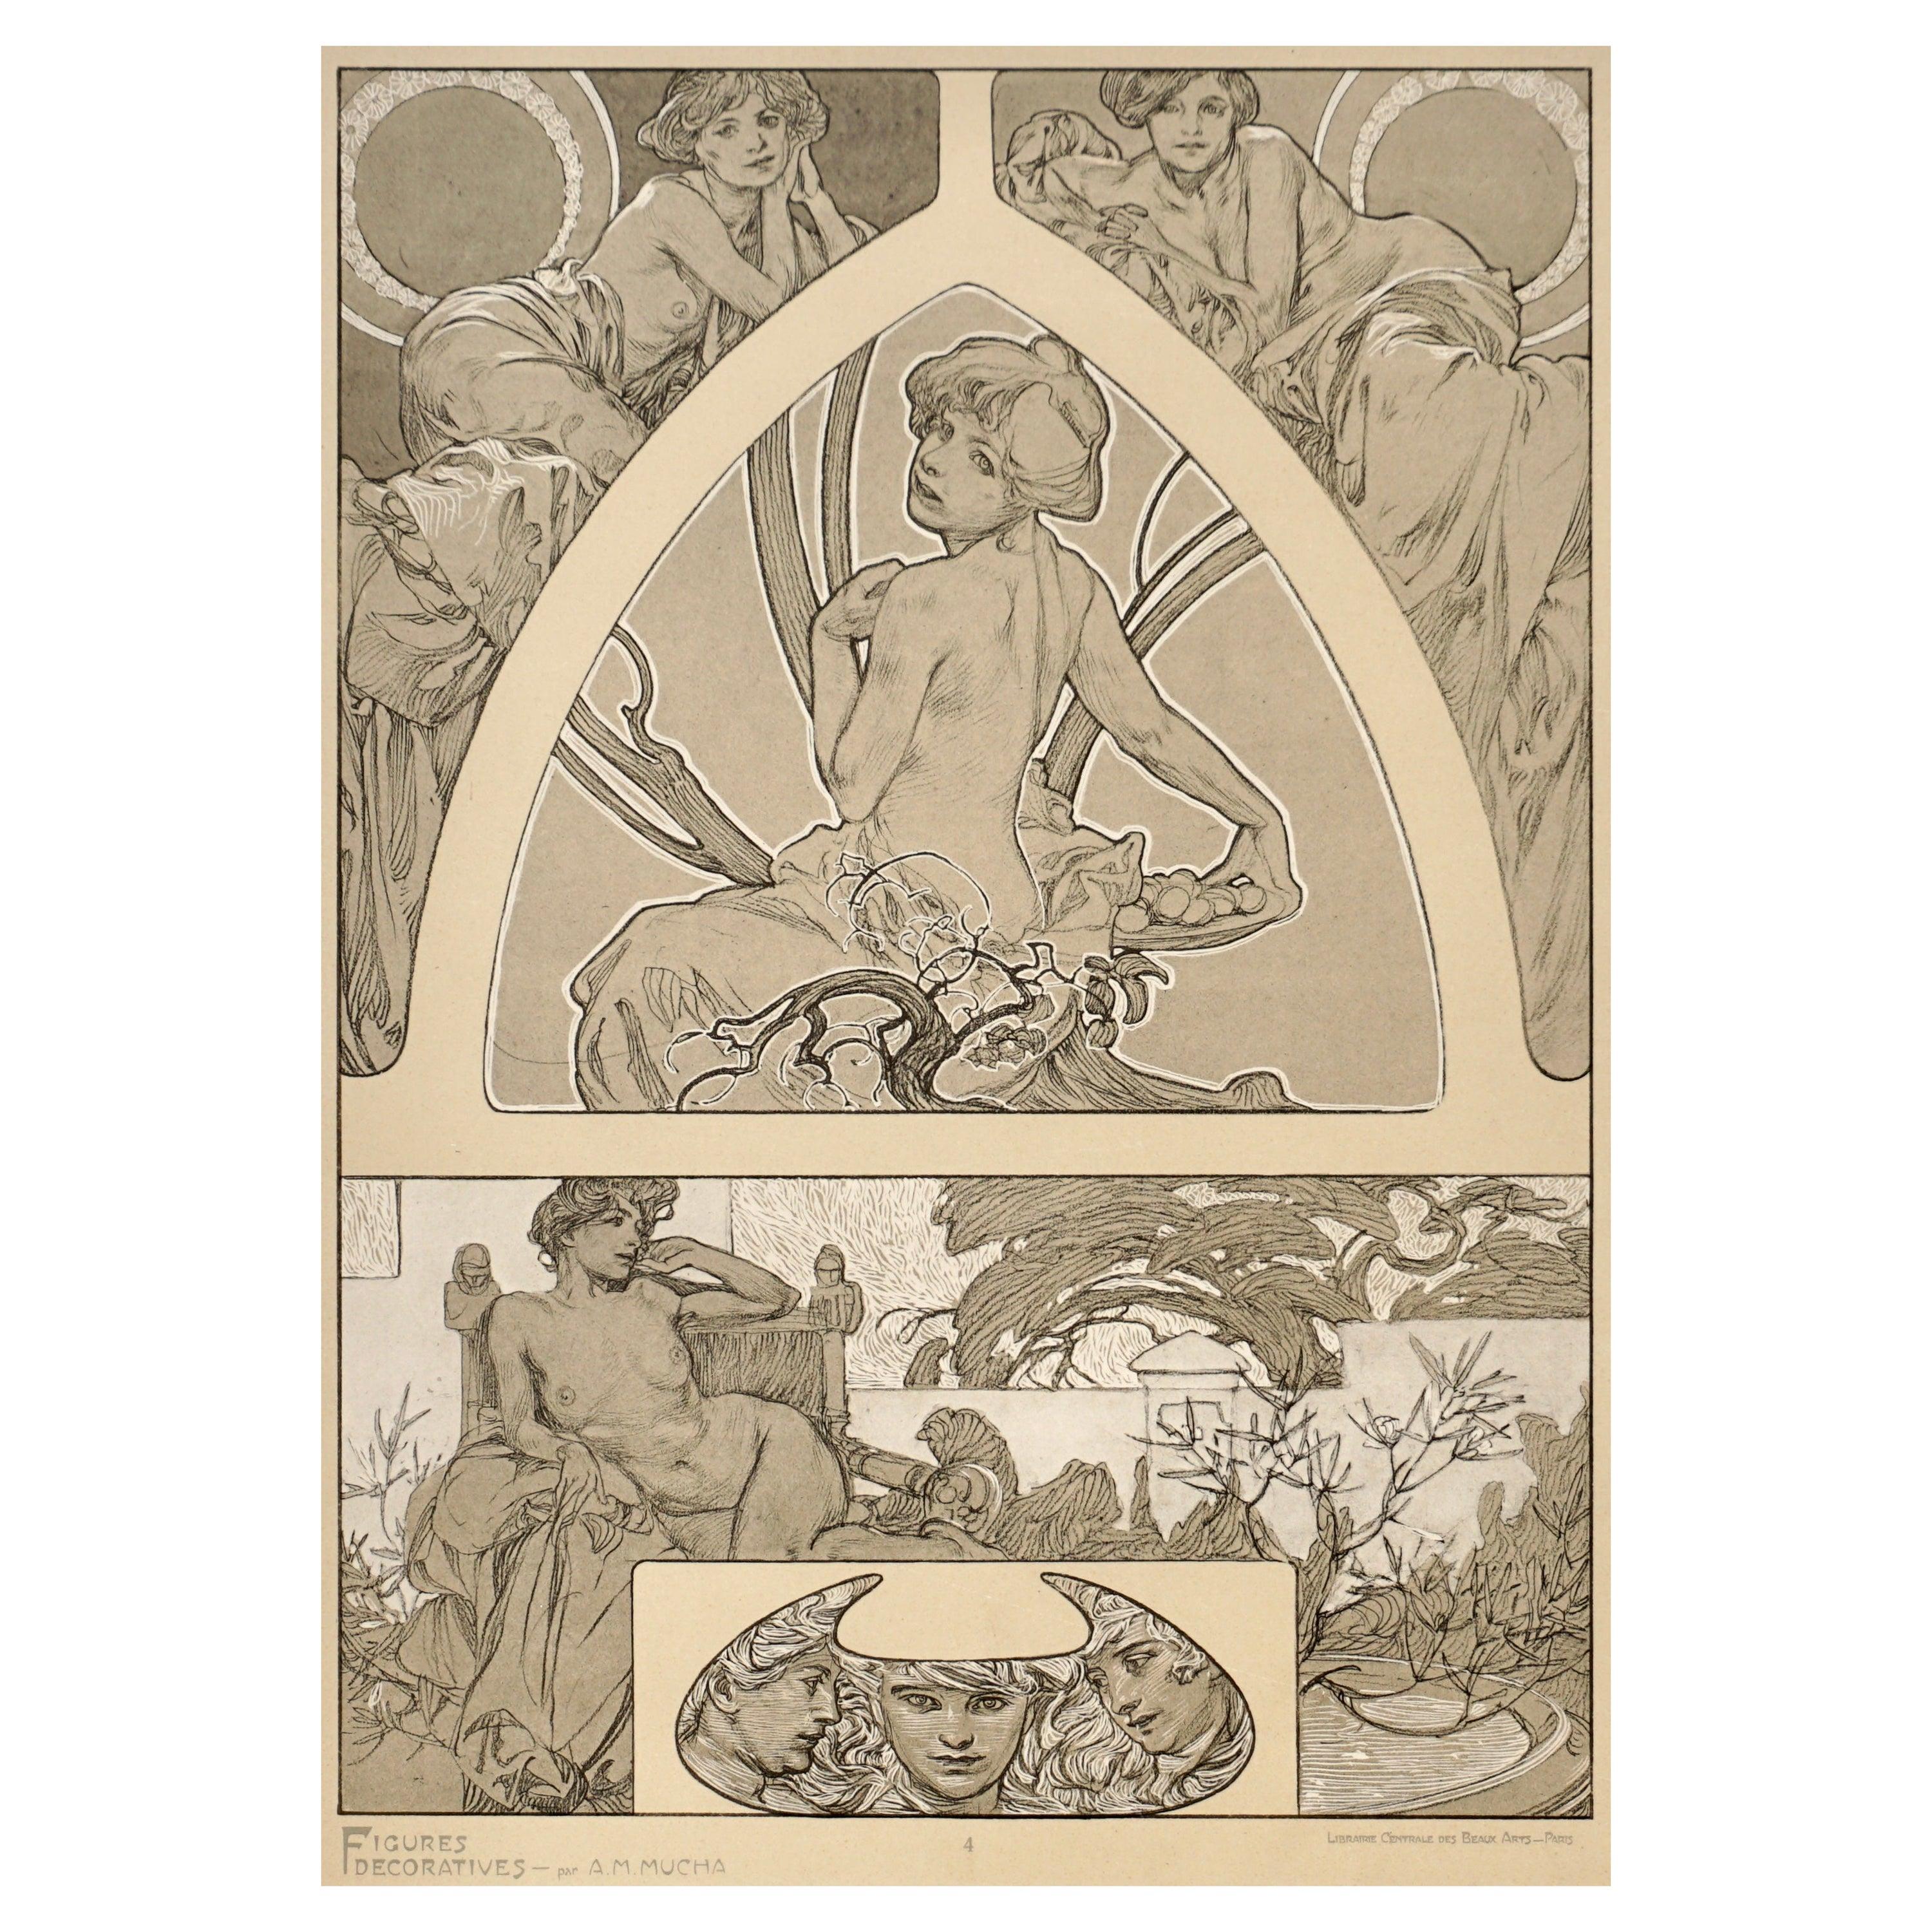 A framed Art Nouveau lithograph collotype poster by Alphone Mucha from 1905 representing the artist’s sketches of nudes, women and beautiful ladies in blacks and white pigments on vellum paper. Plate 4 of “Figures Decoratives par A. M. Mucha,”